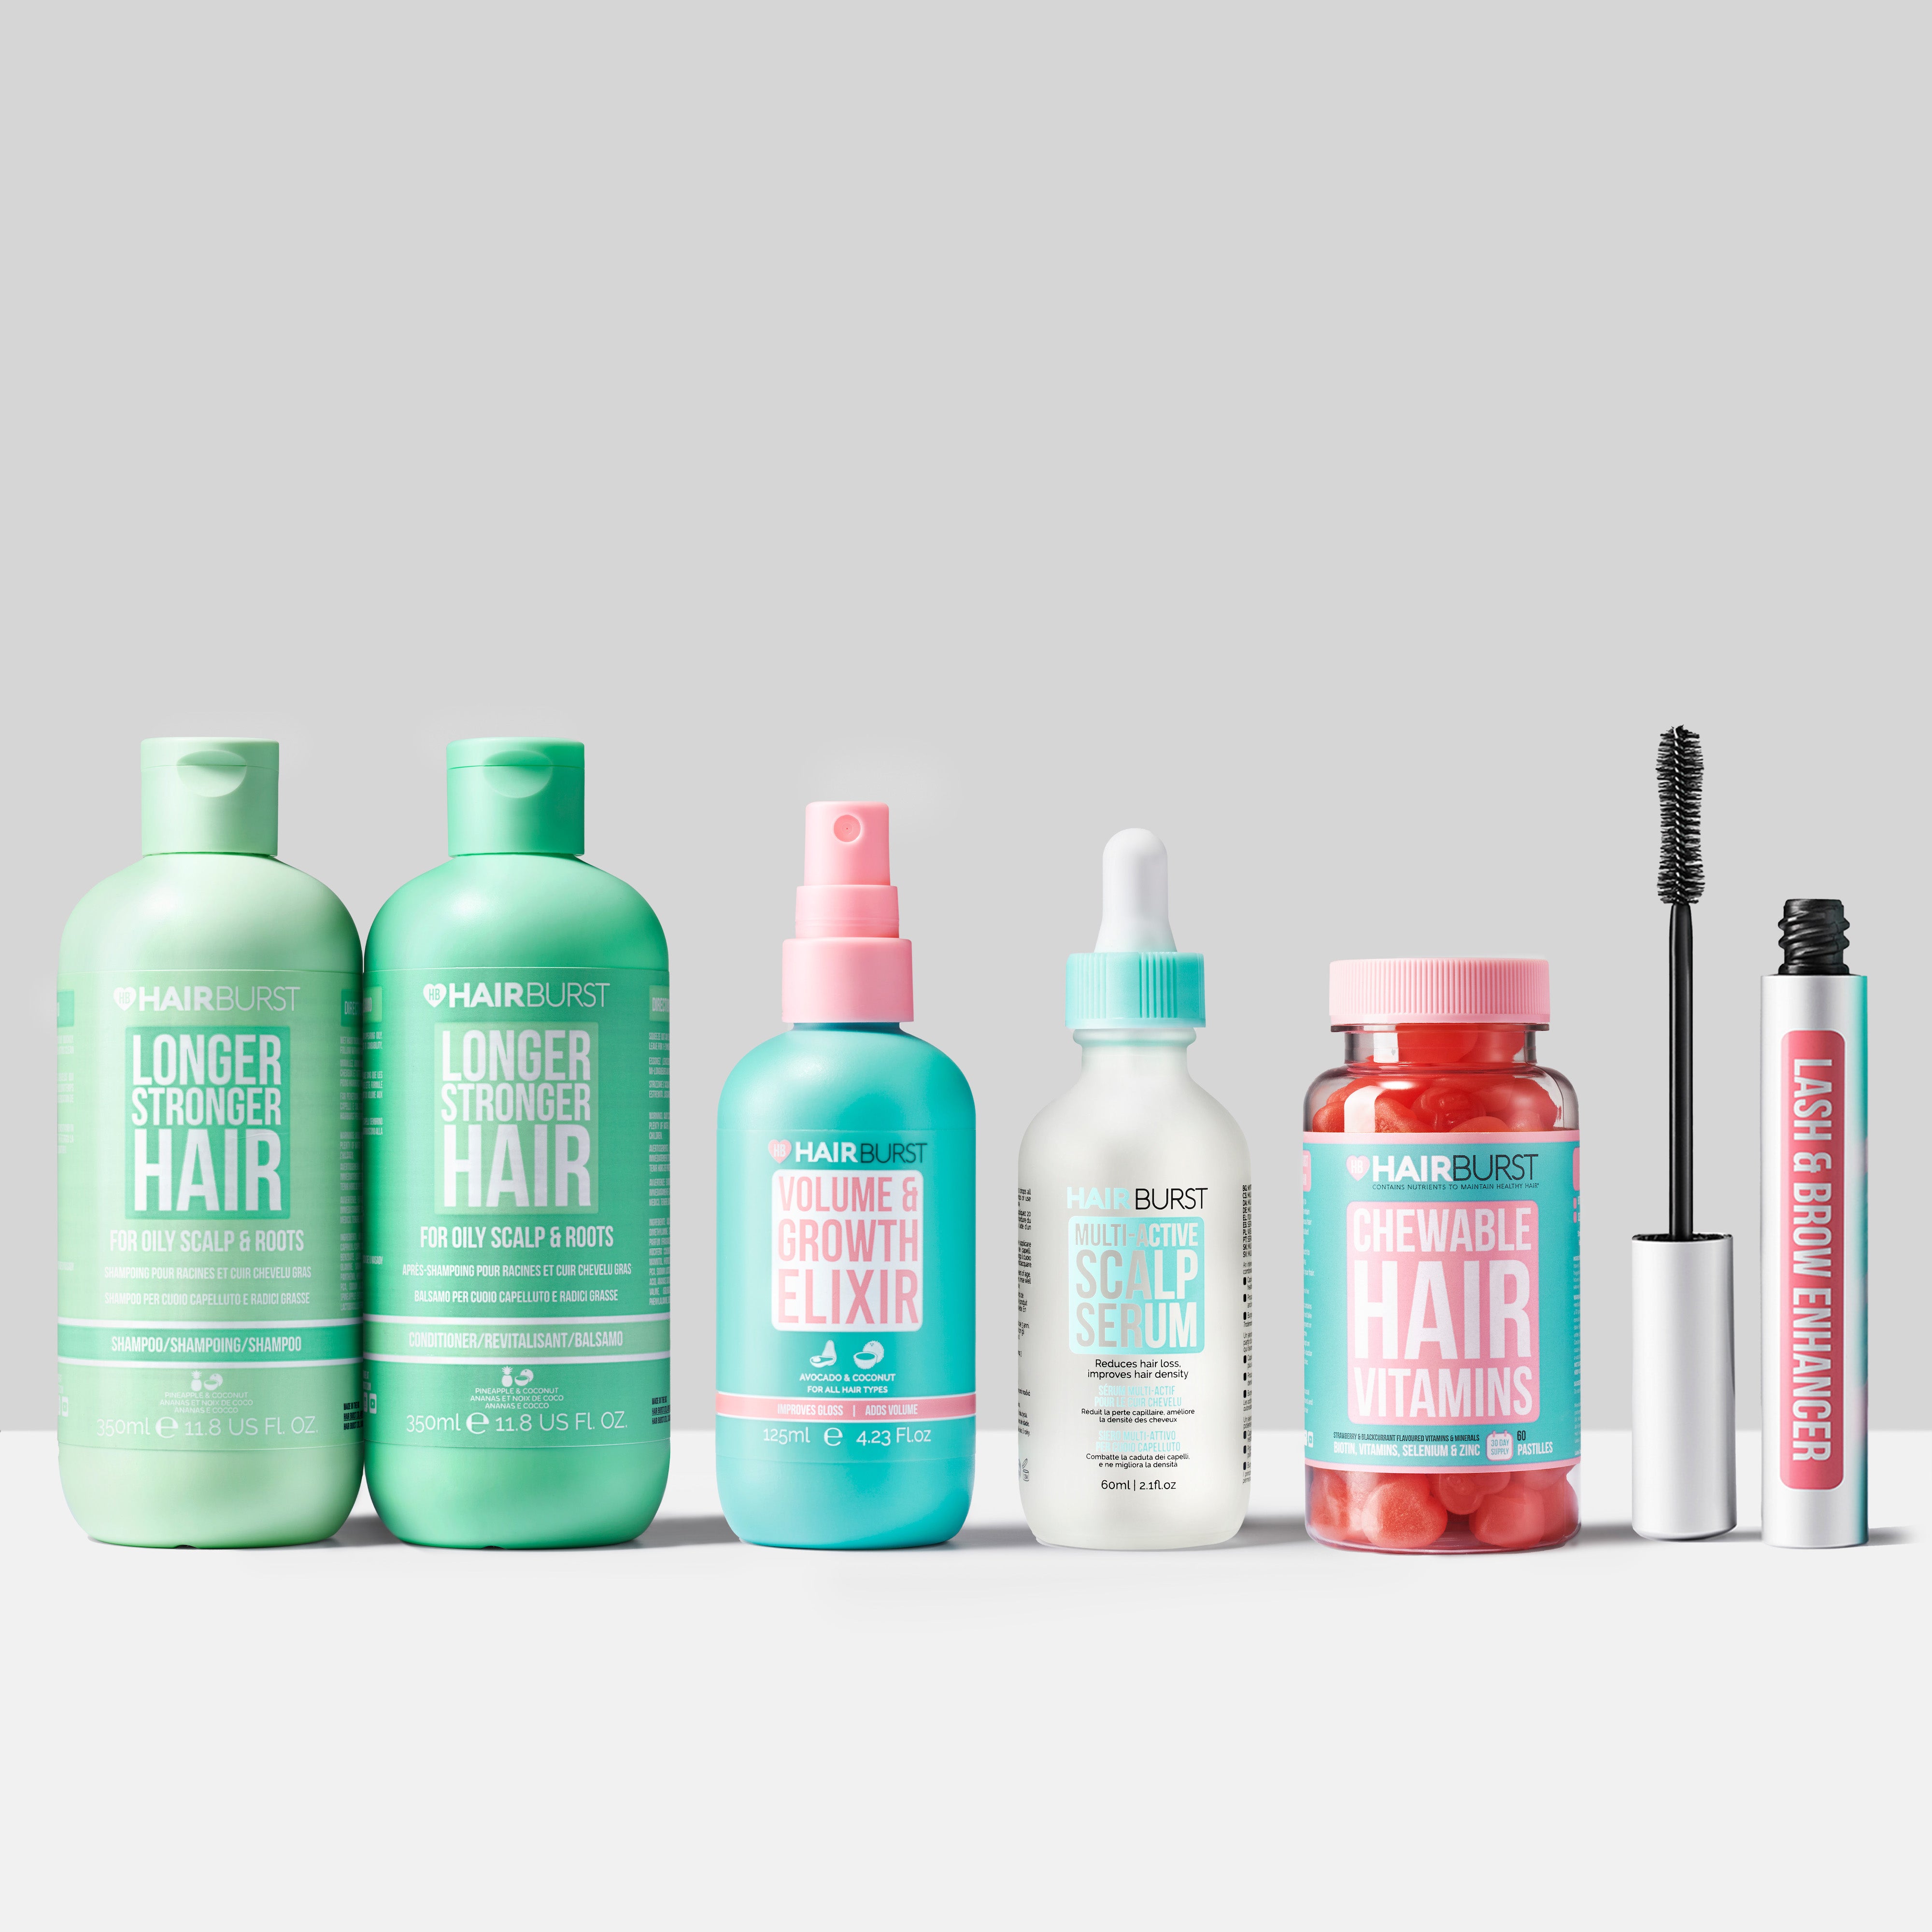 The Total Hair Growth Collection